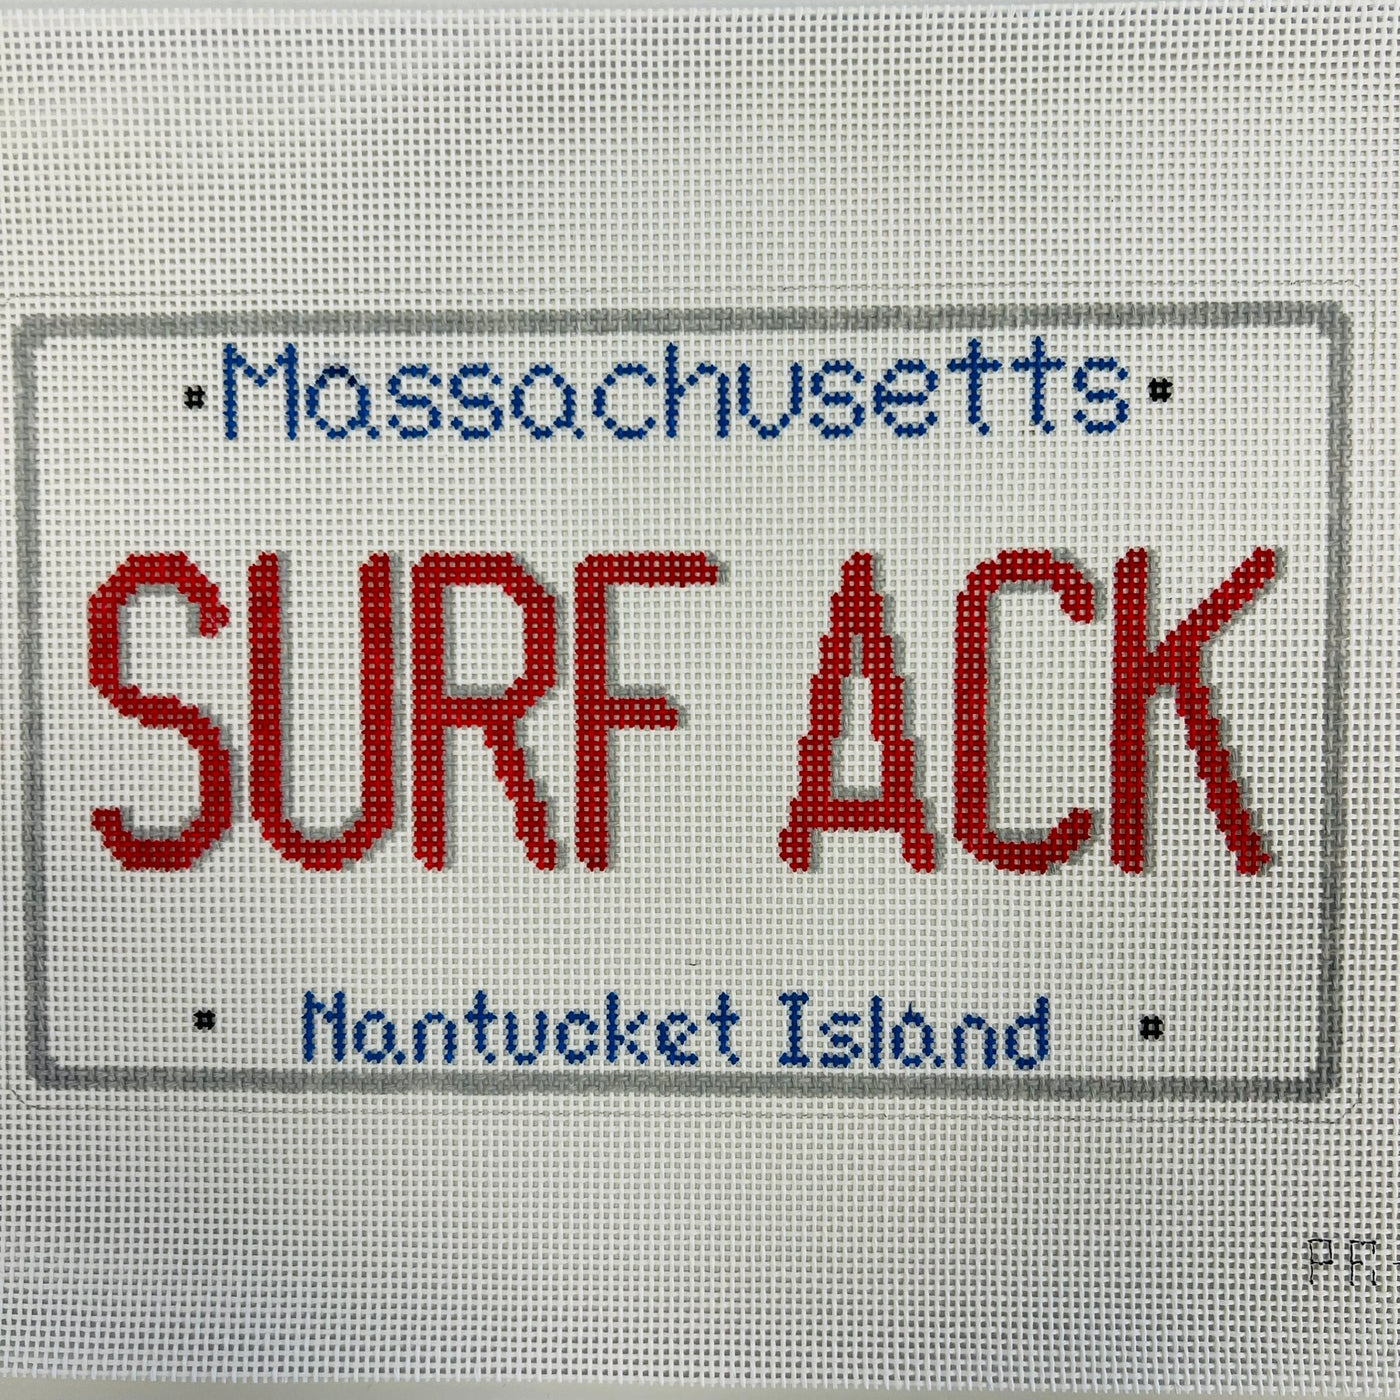 Surf Nantucket License Plate Needlepoint Canvas